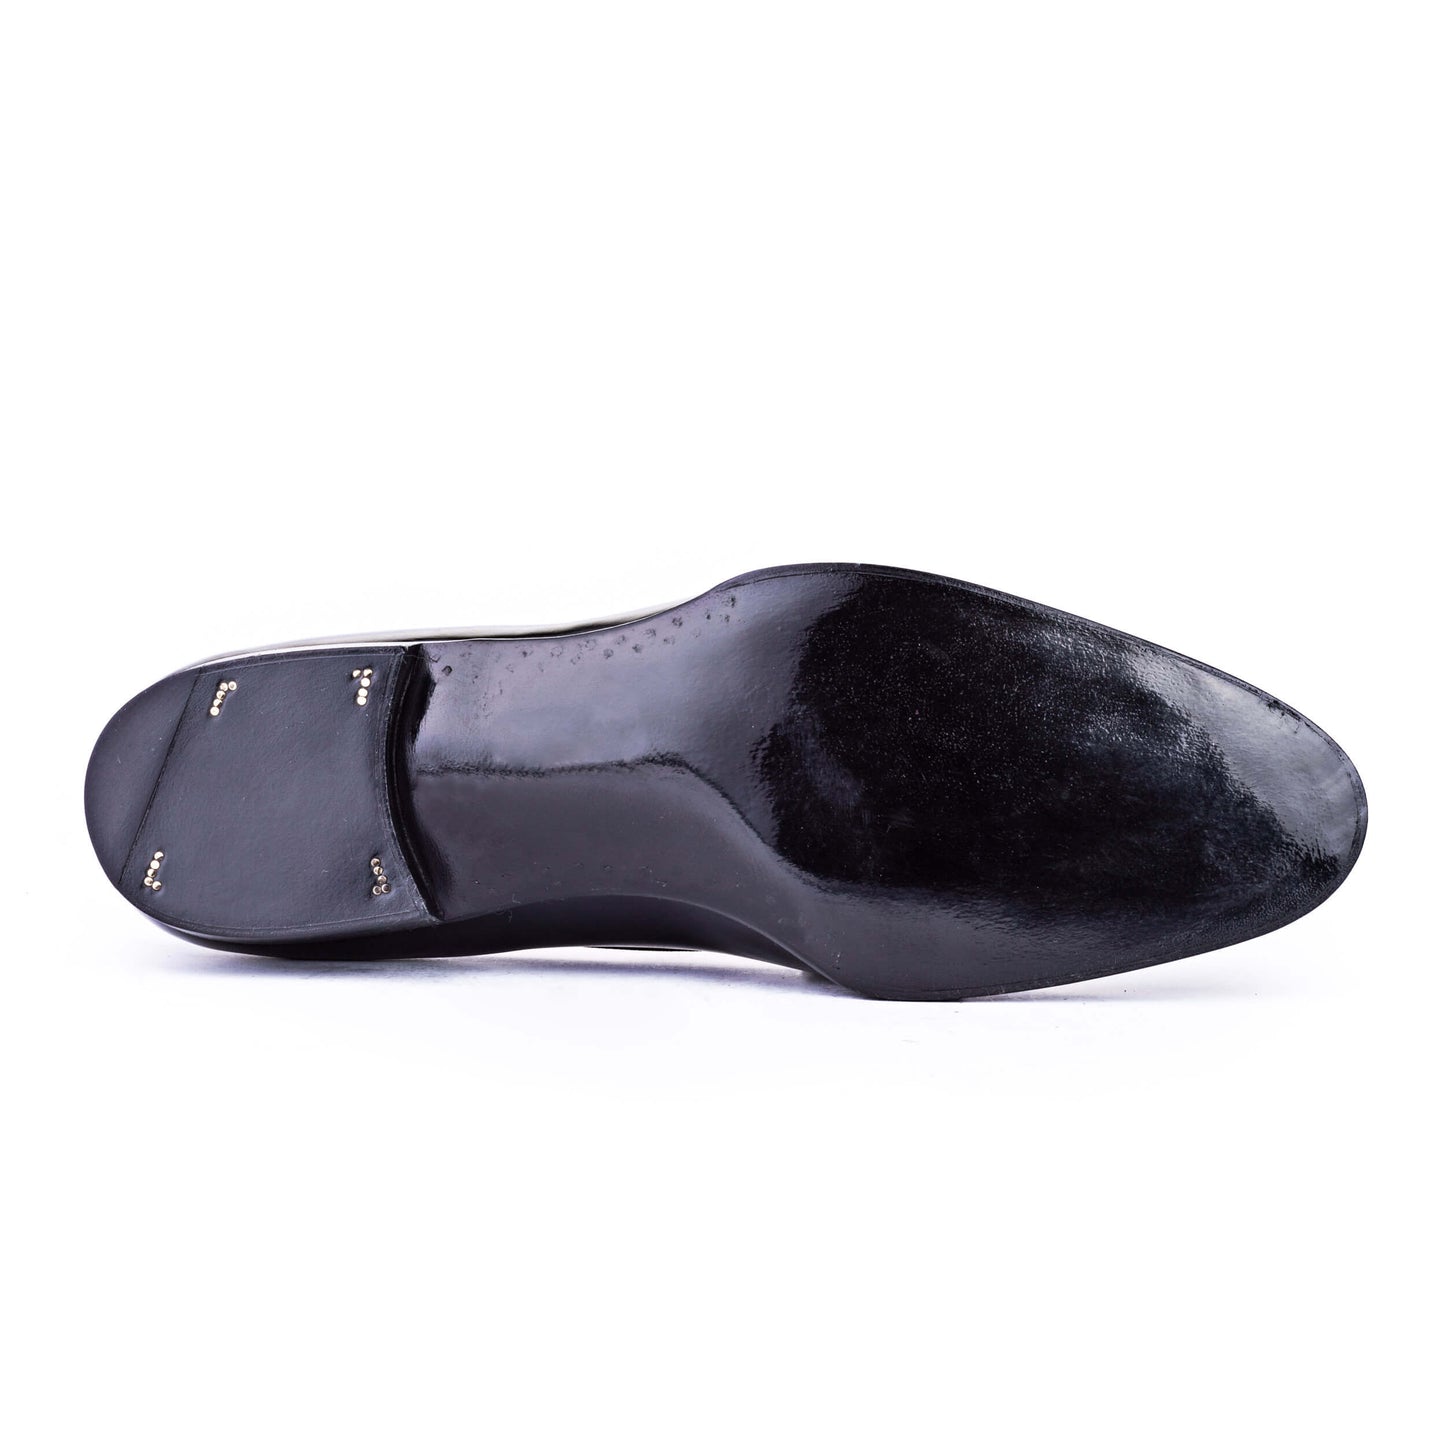 Opera dress loafer with satin loop – Saint Crispin's